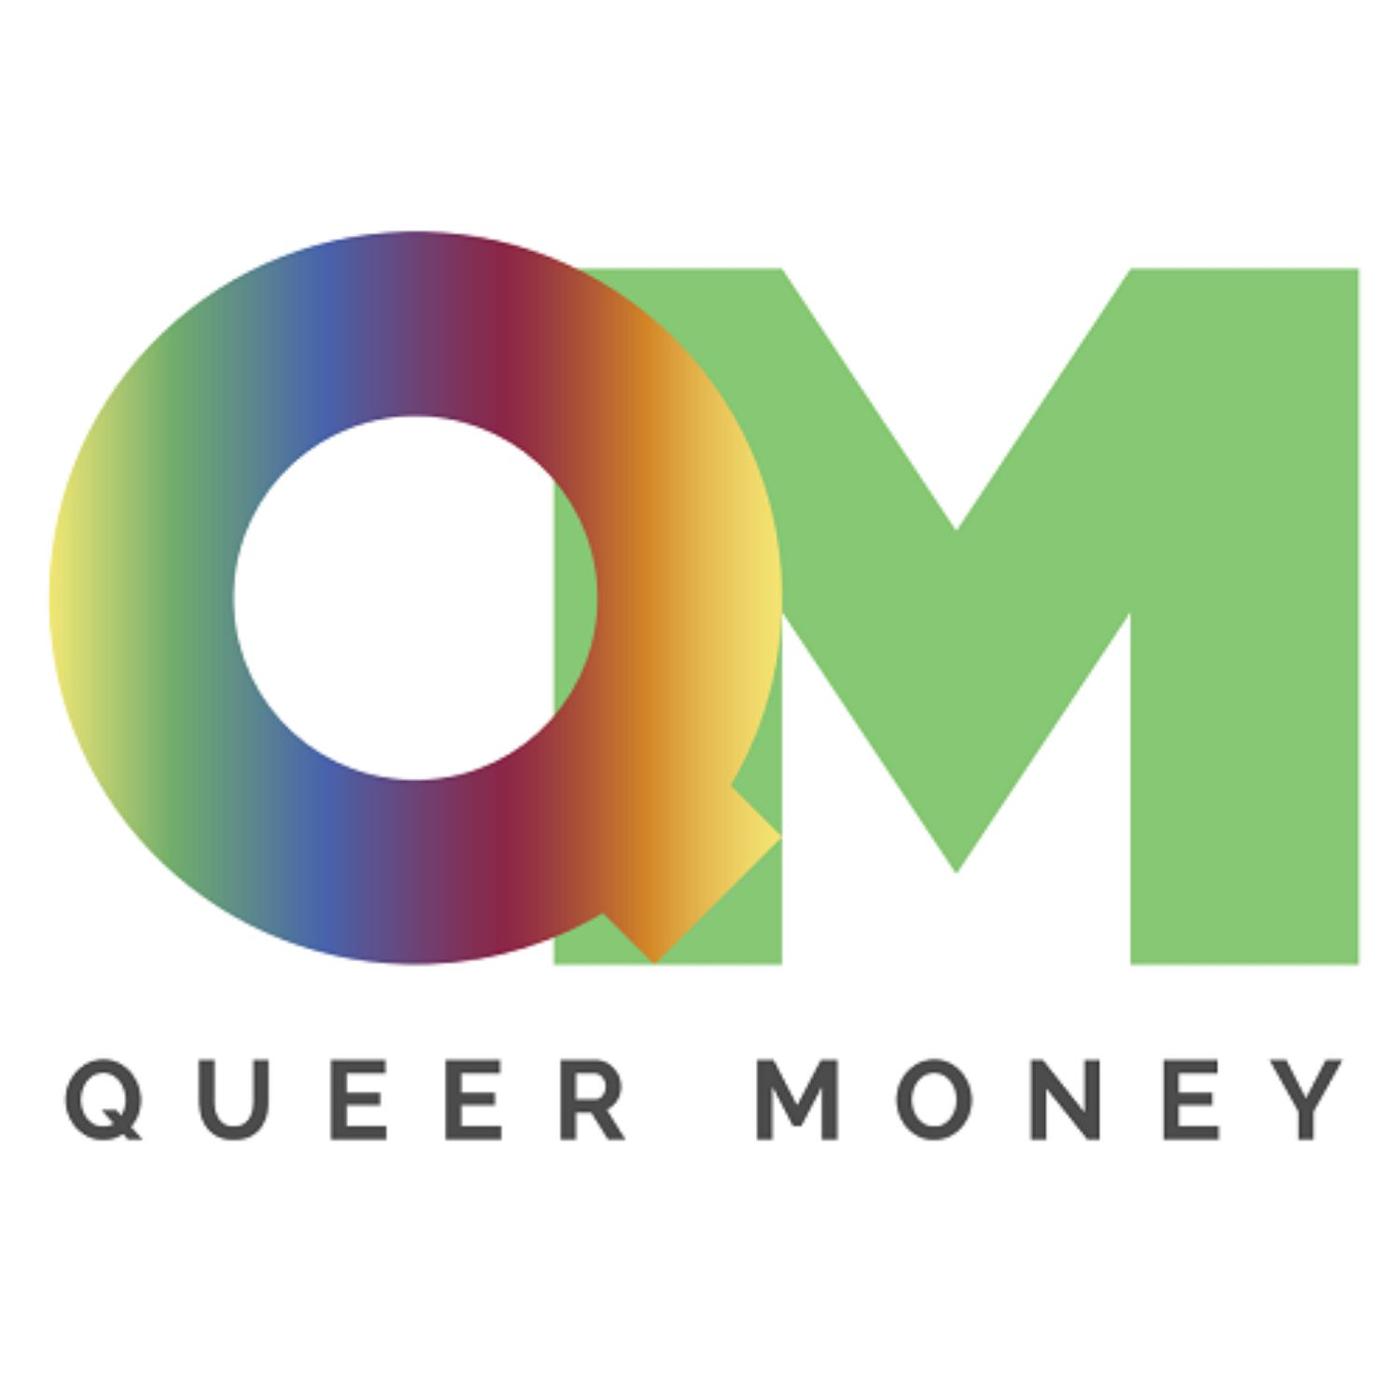 David Bach Media Archive - david bach the latte factor featured on the queer money podcast 3 critical keys to living your best life